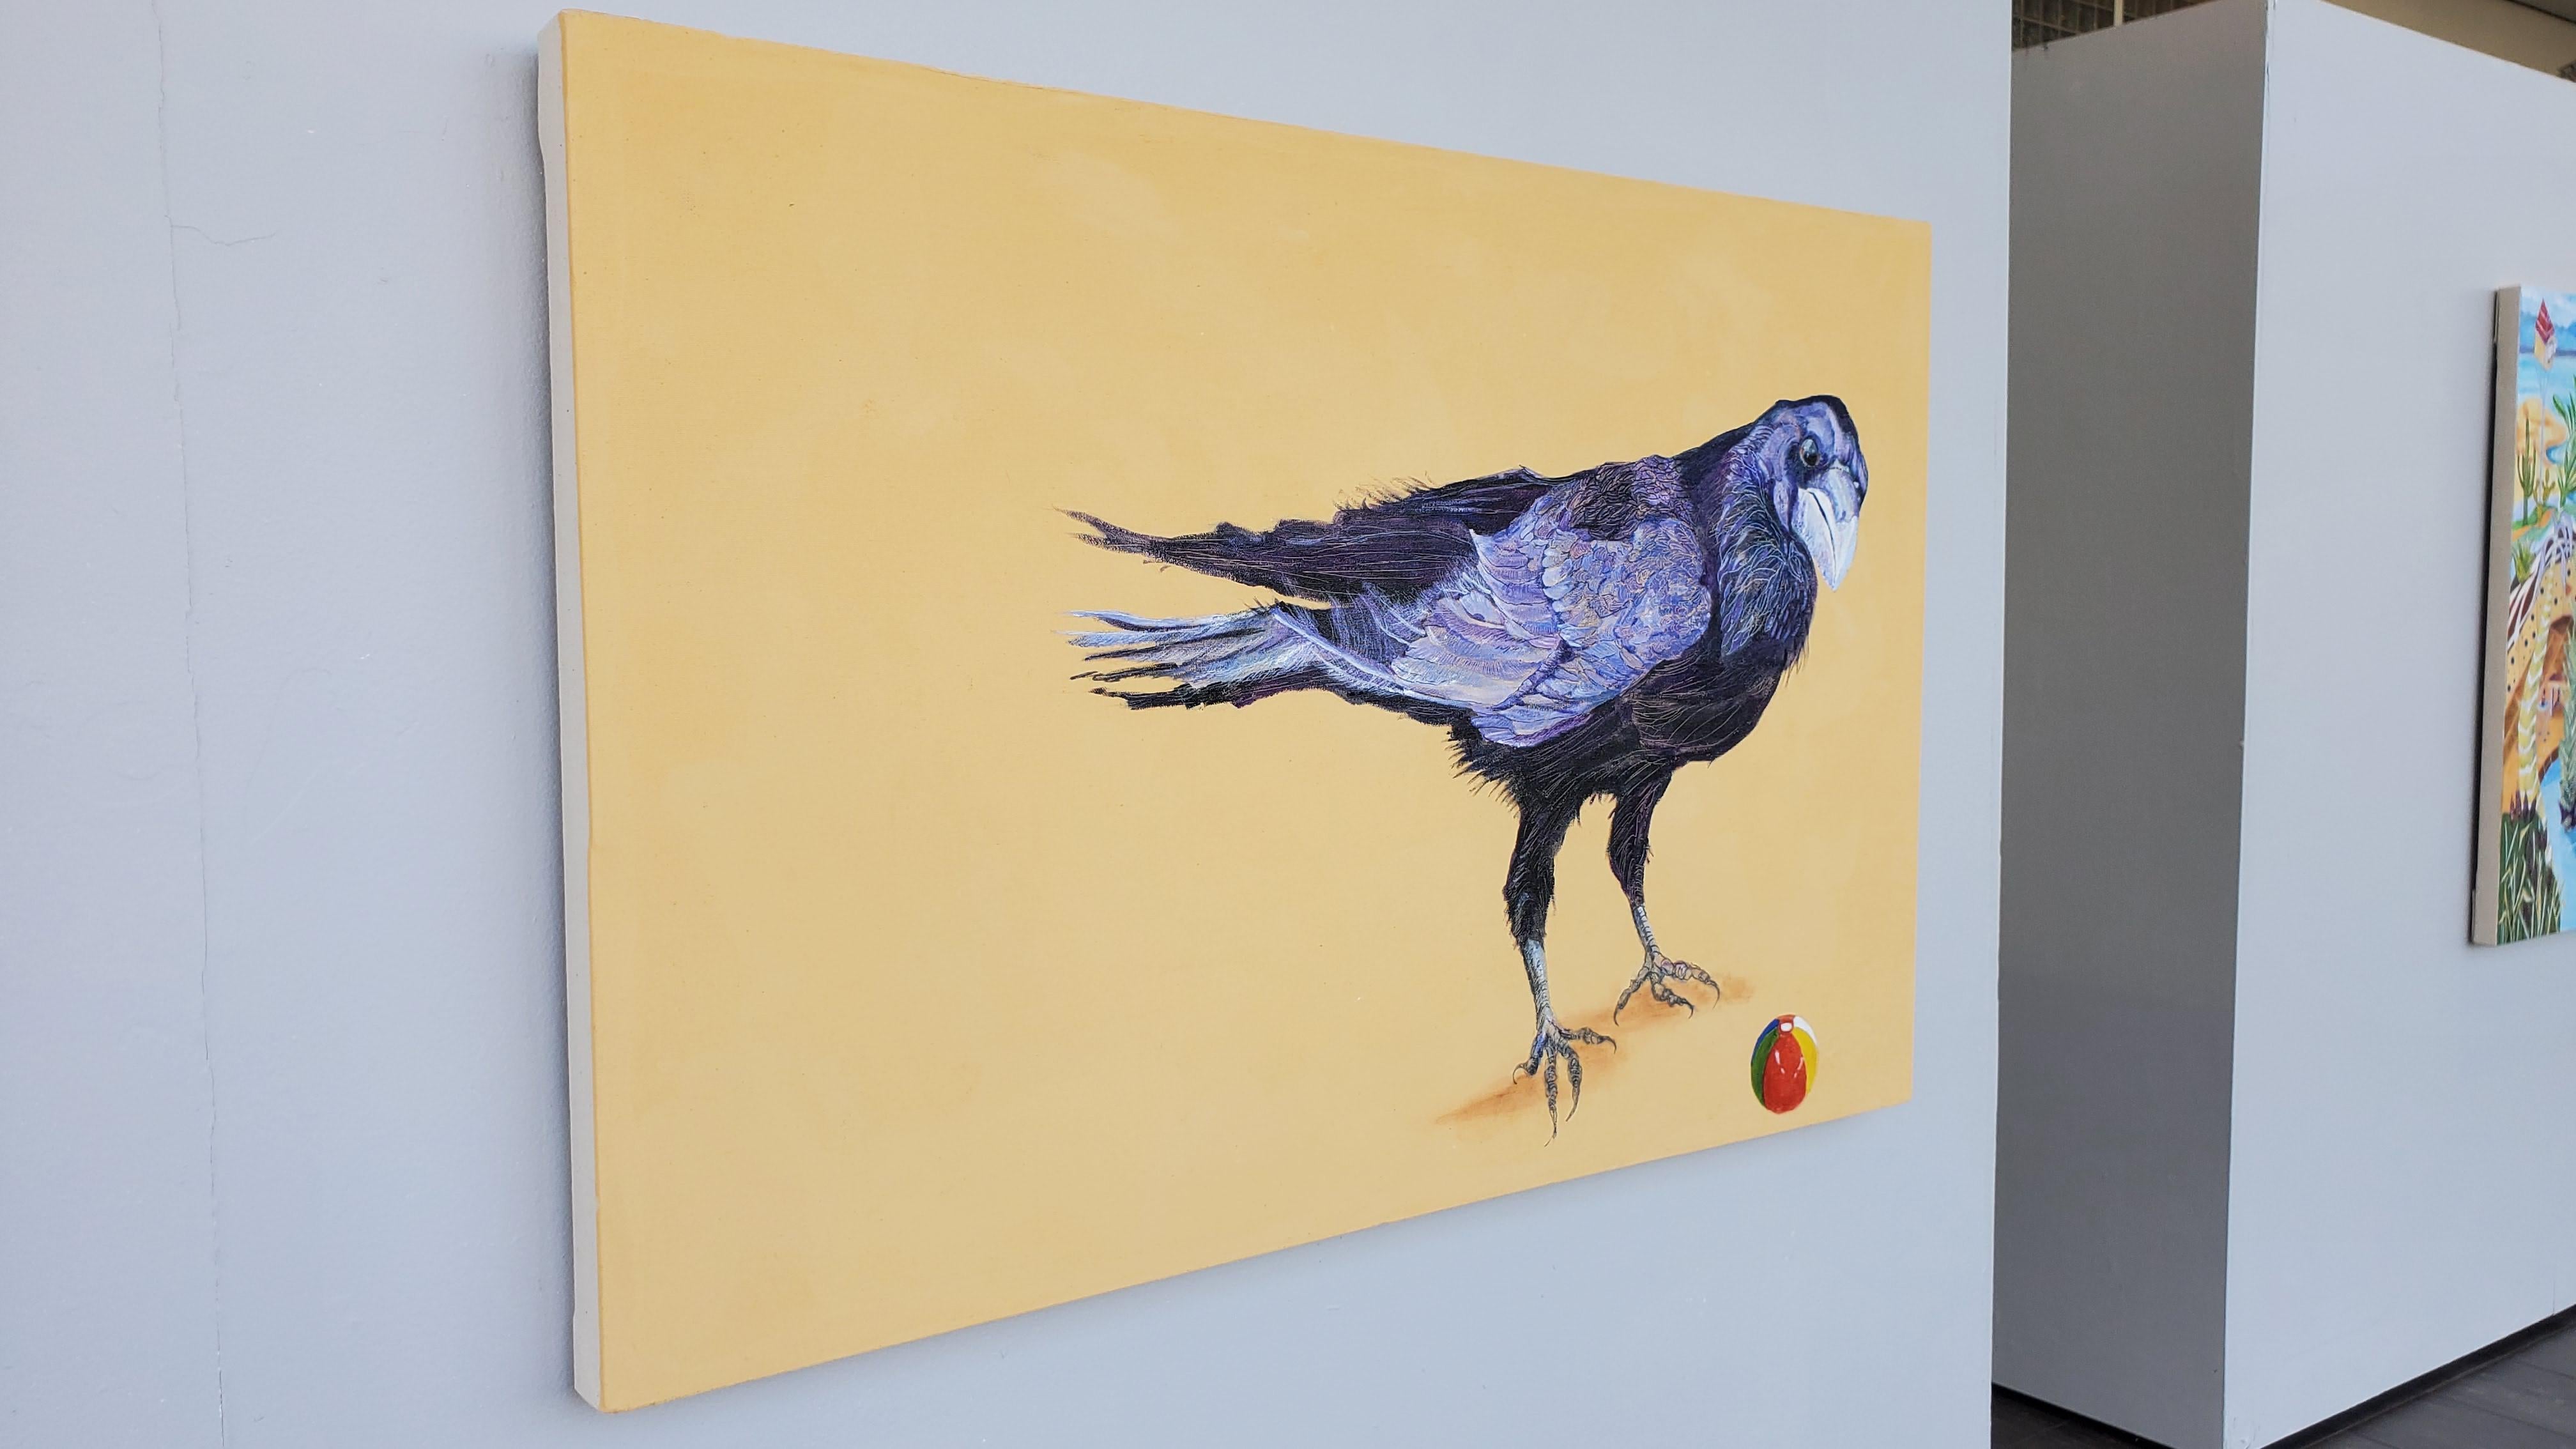 Alison Keenan
Avian Fables: Raven and Beach Ball 1
acrylic and ink on canvas
2 x 3 feet (91 x 61 cm)


Alison Keenan – Artist Biography

Alison Keenan, a multi-disciplinary artist, lived in Burma before returning home to England to complete her art